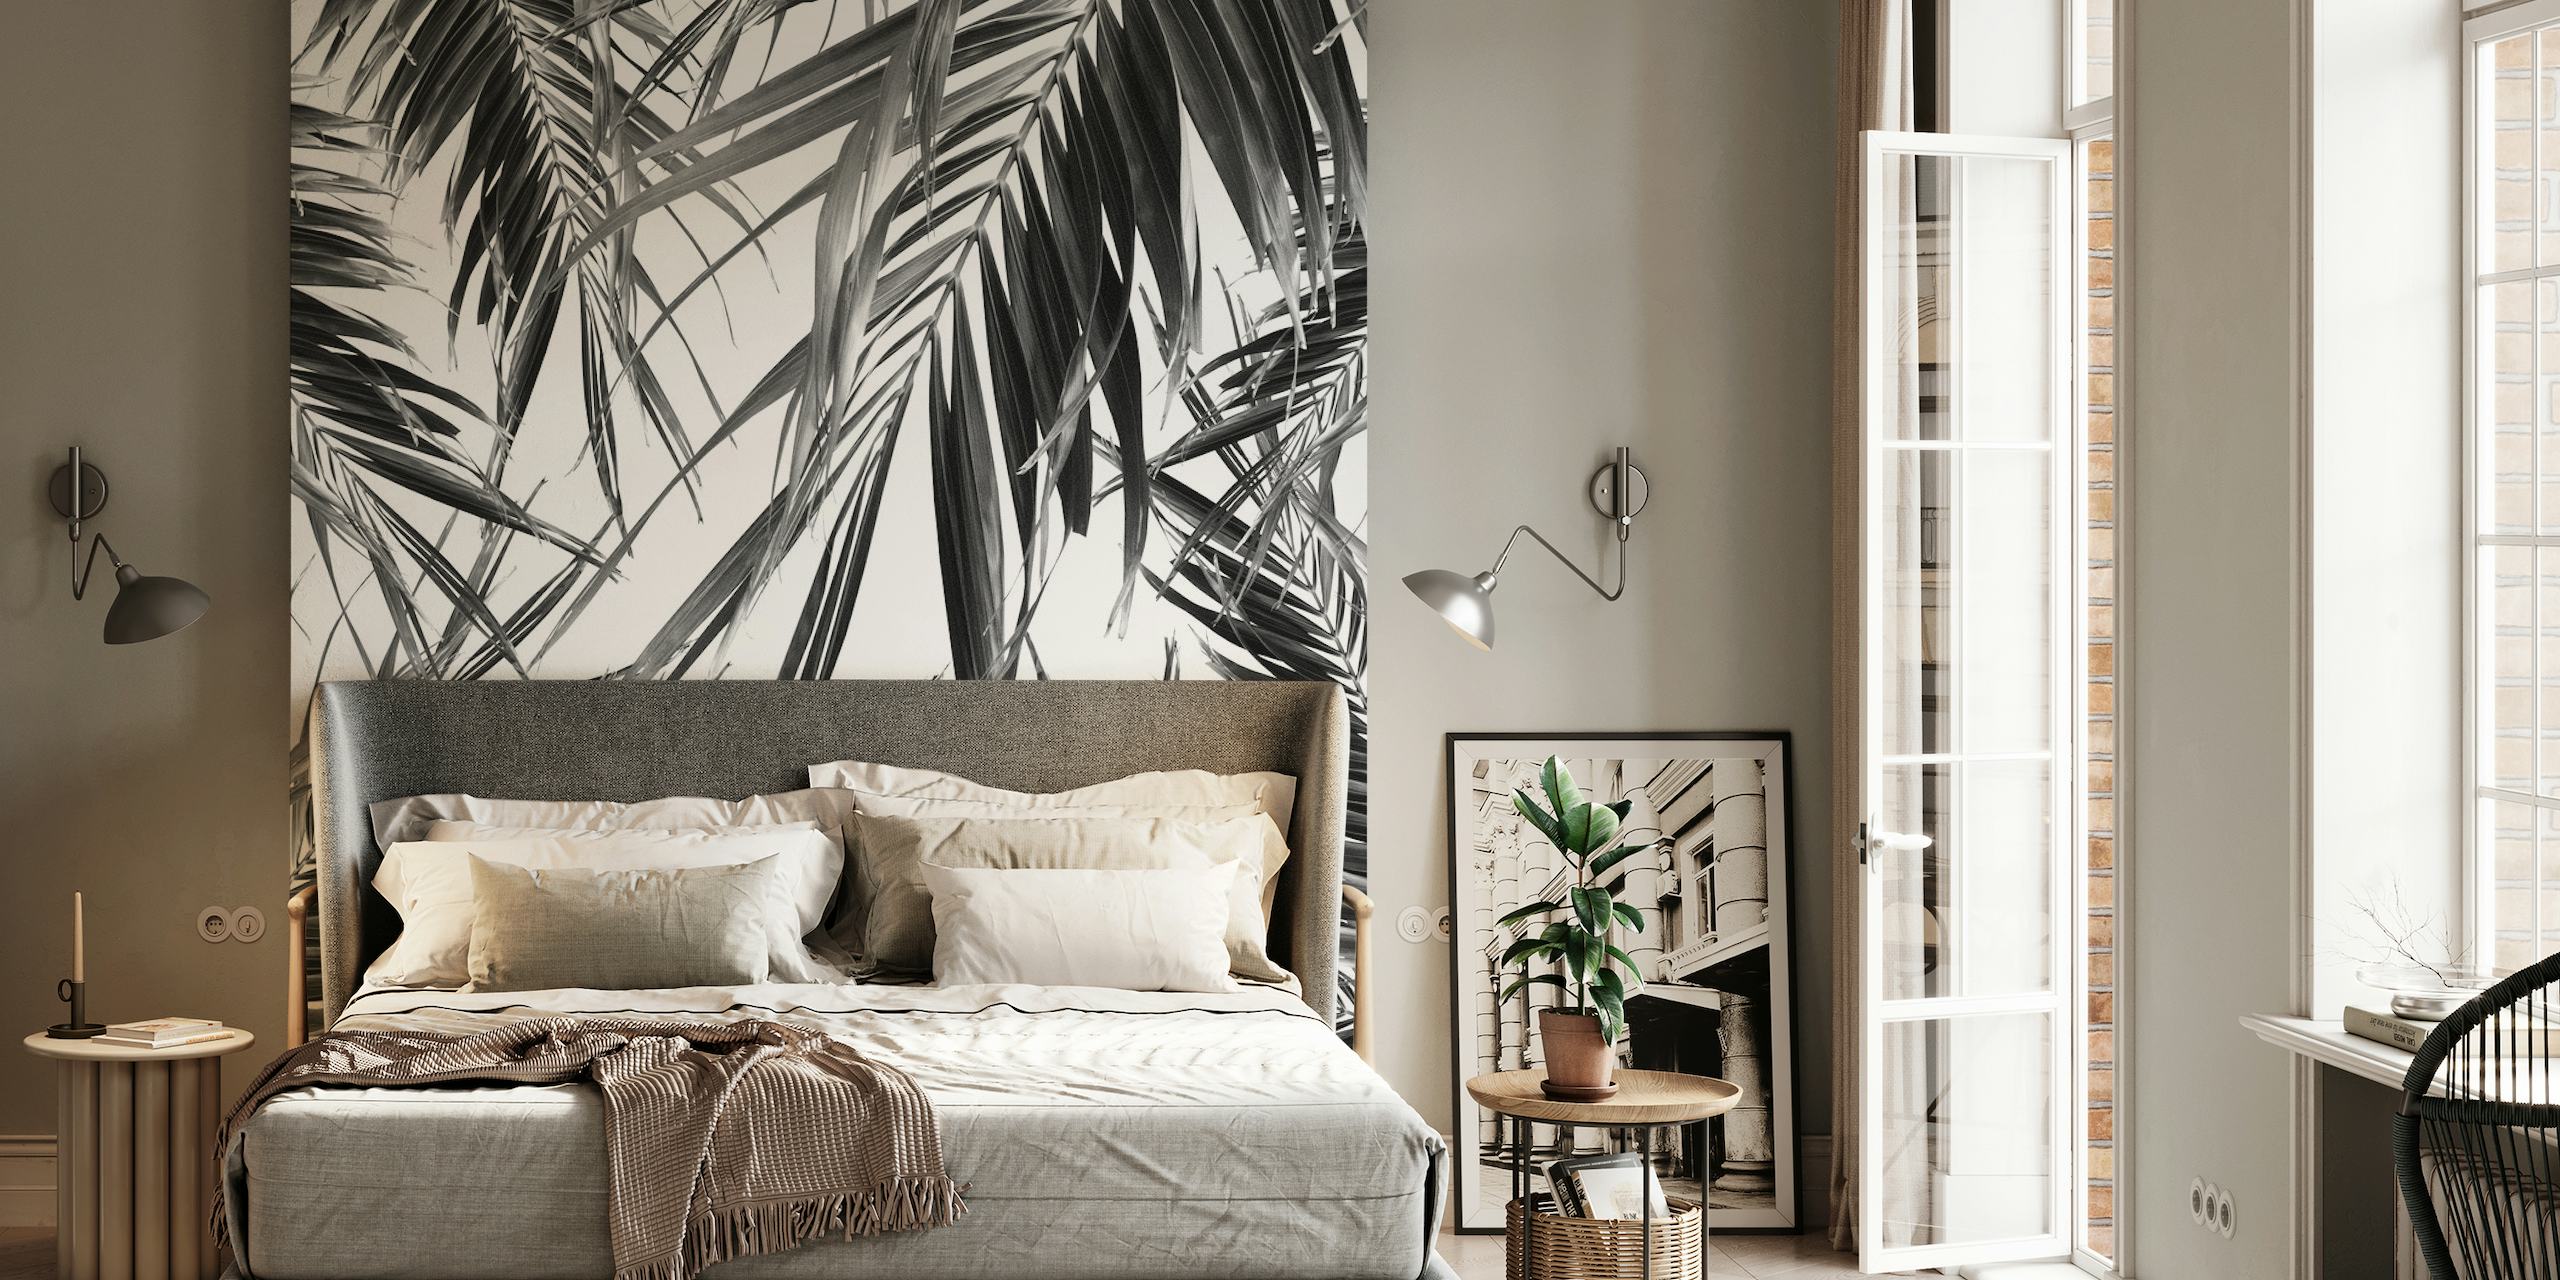 Monochrome palm leaves jungle wall mural for interior decoration